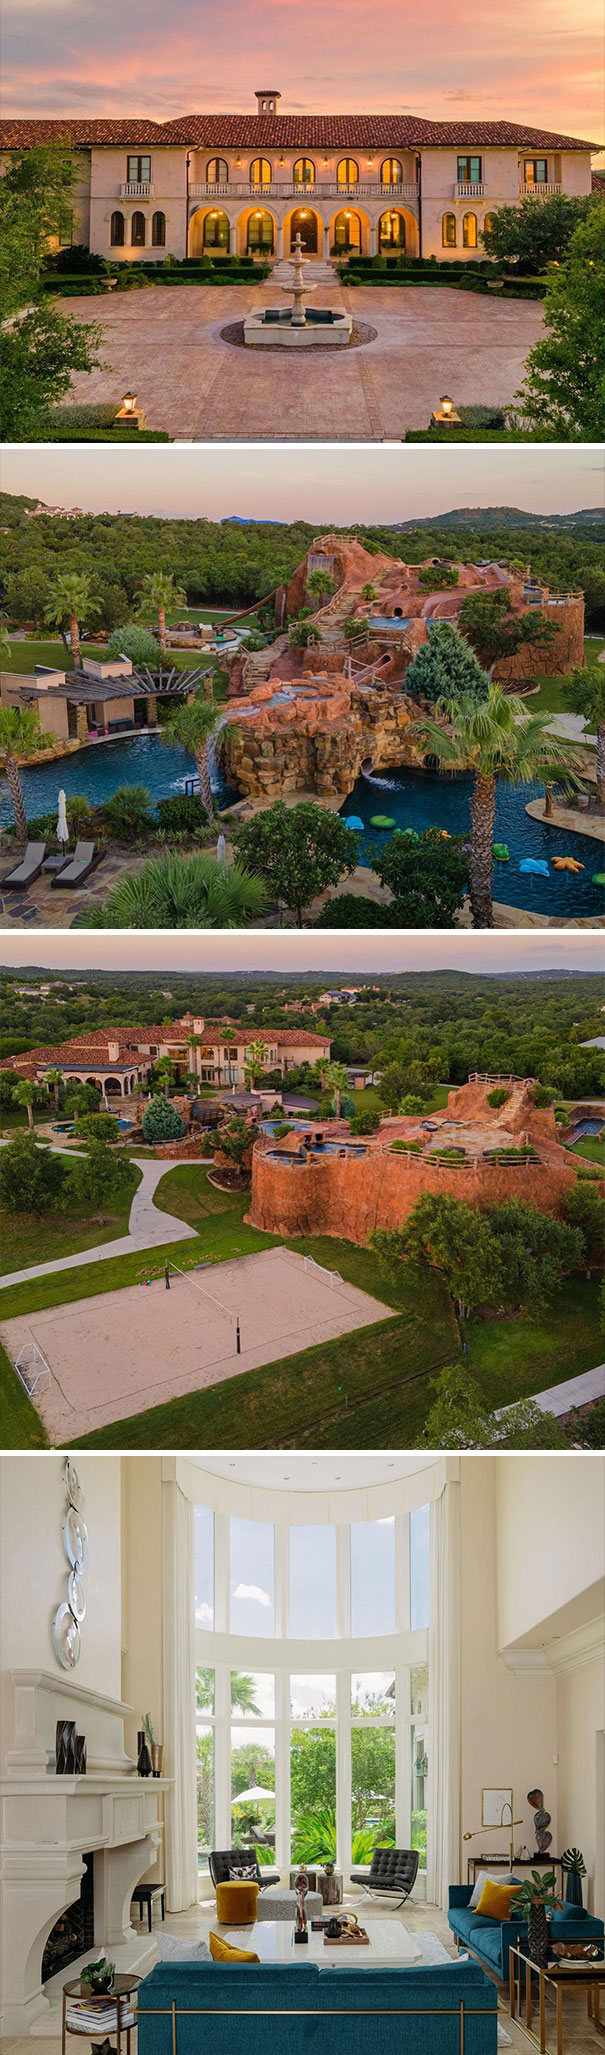 Former Nba Star Tony Parker’s Texas Home Is For Sale. $19.5 Million